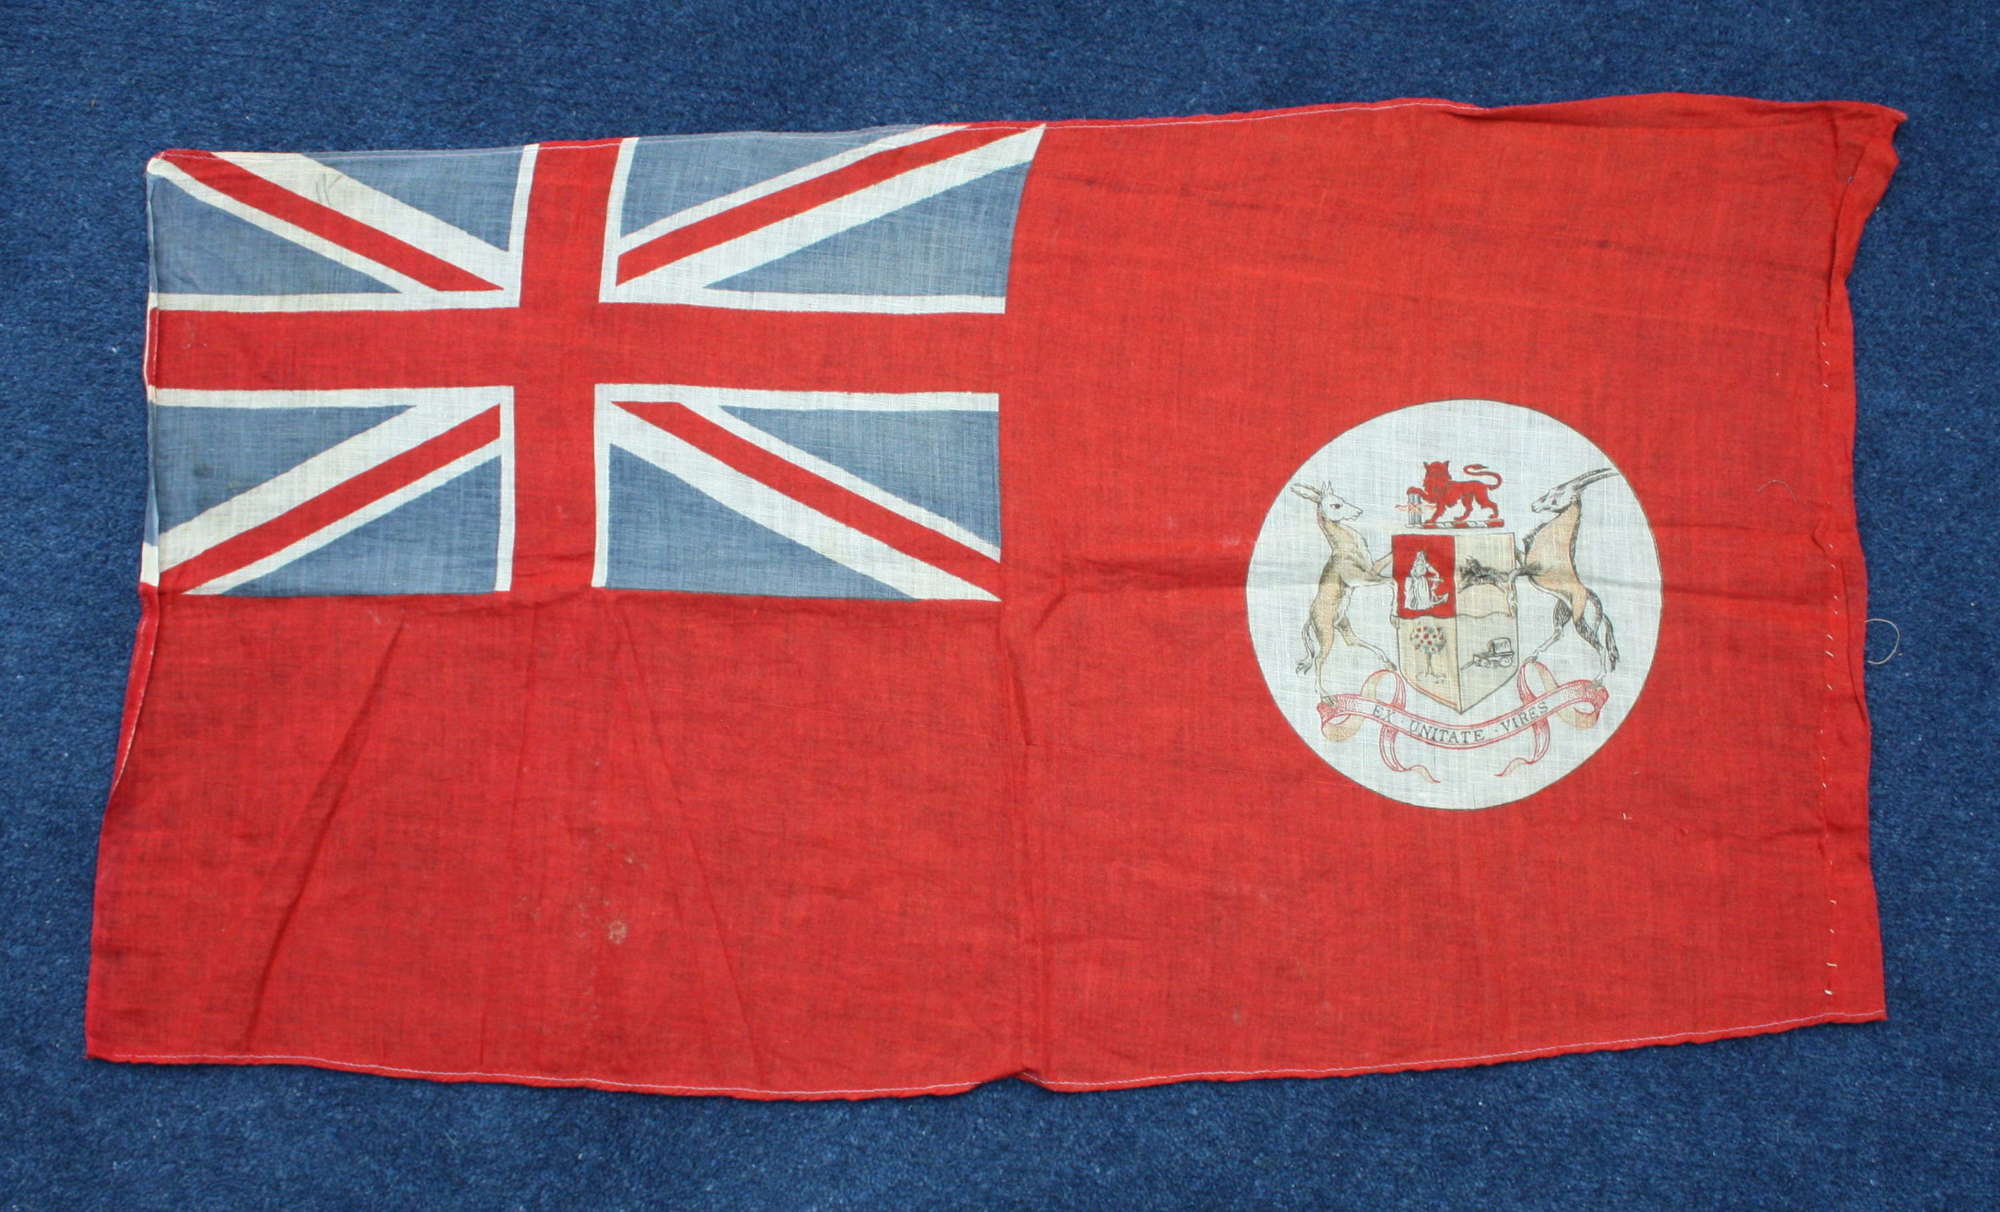 Boer War - WW1 South African Cotton Flag. Measures 30 x 15 inches